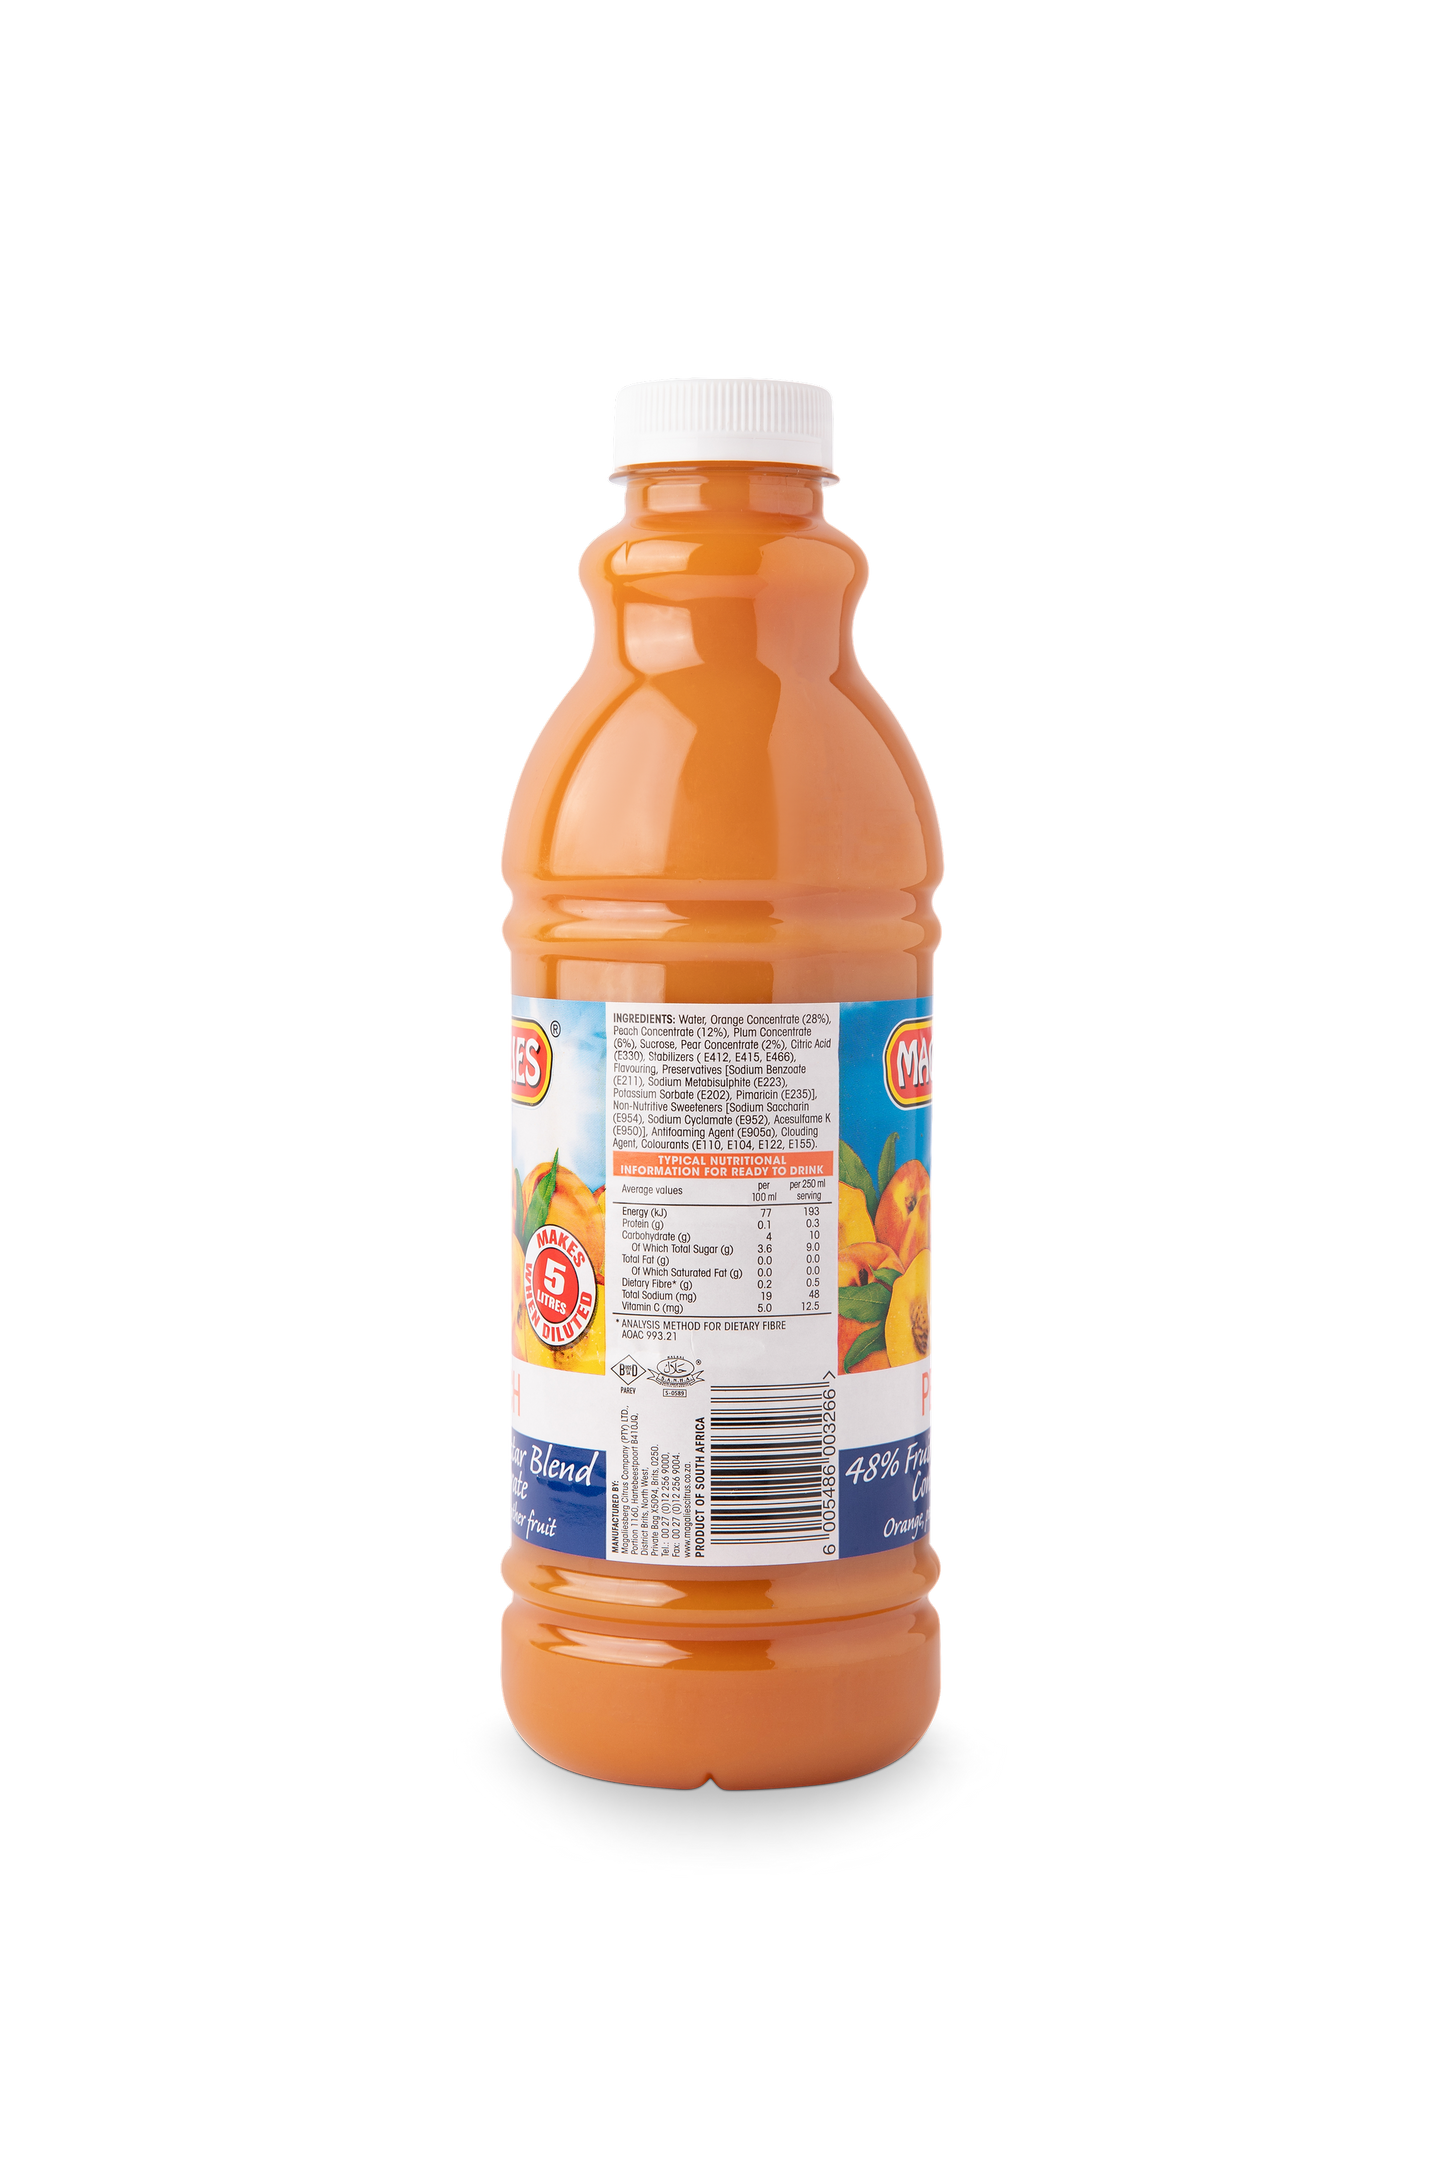 Magalies 1 litre Peach 48% 1+4 fruit nectar concentrate